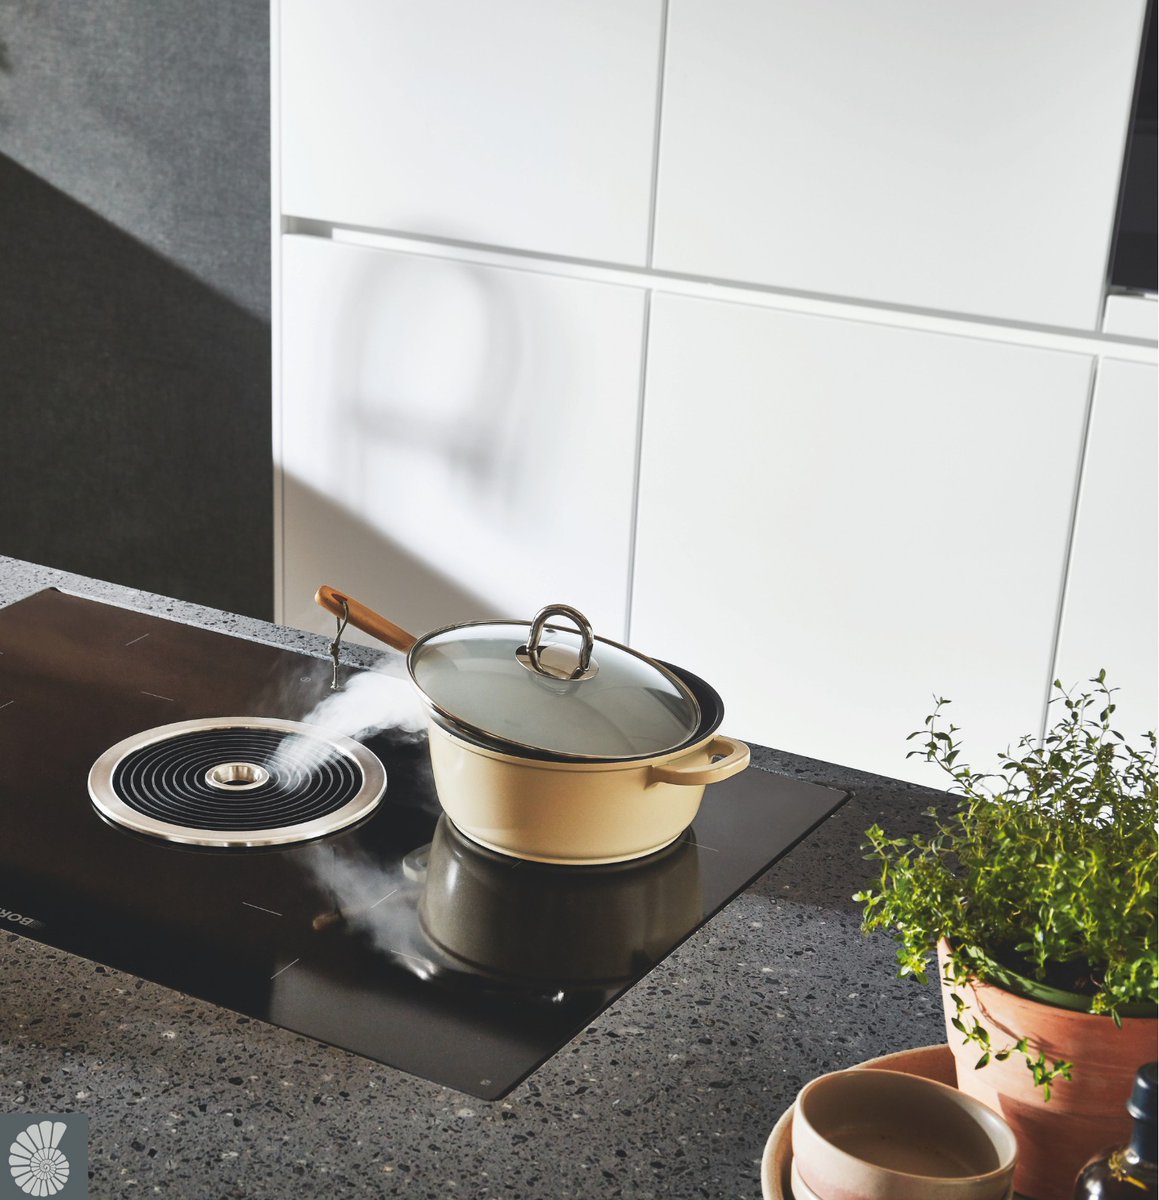 BORA venting induction hob. Perfect for island designs and open plan living…

If you would like any advice from our expert designers, call our Budleigh Salterton Showroom on 01395 442463 today. 📲

#inductionhob #ventinghob #openplanliving #islanddesigns #contactustoday